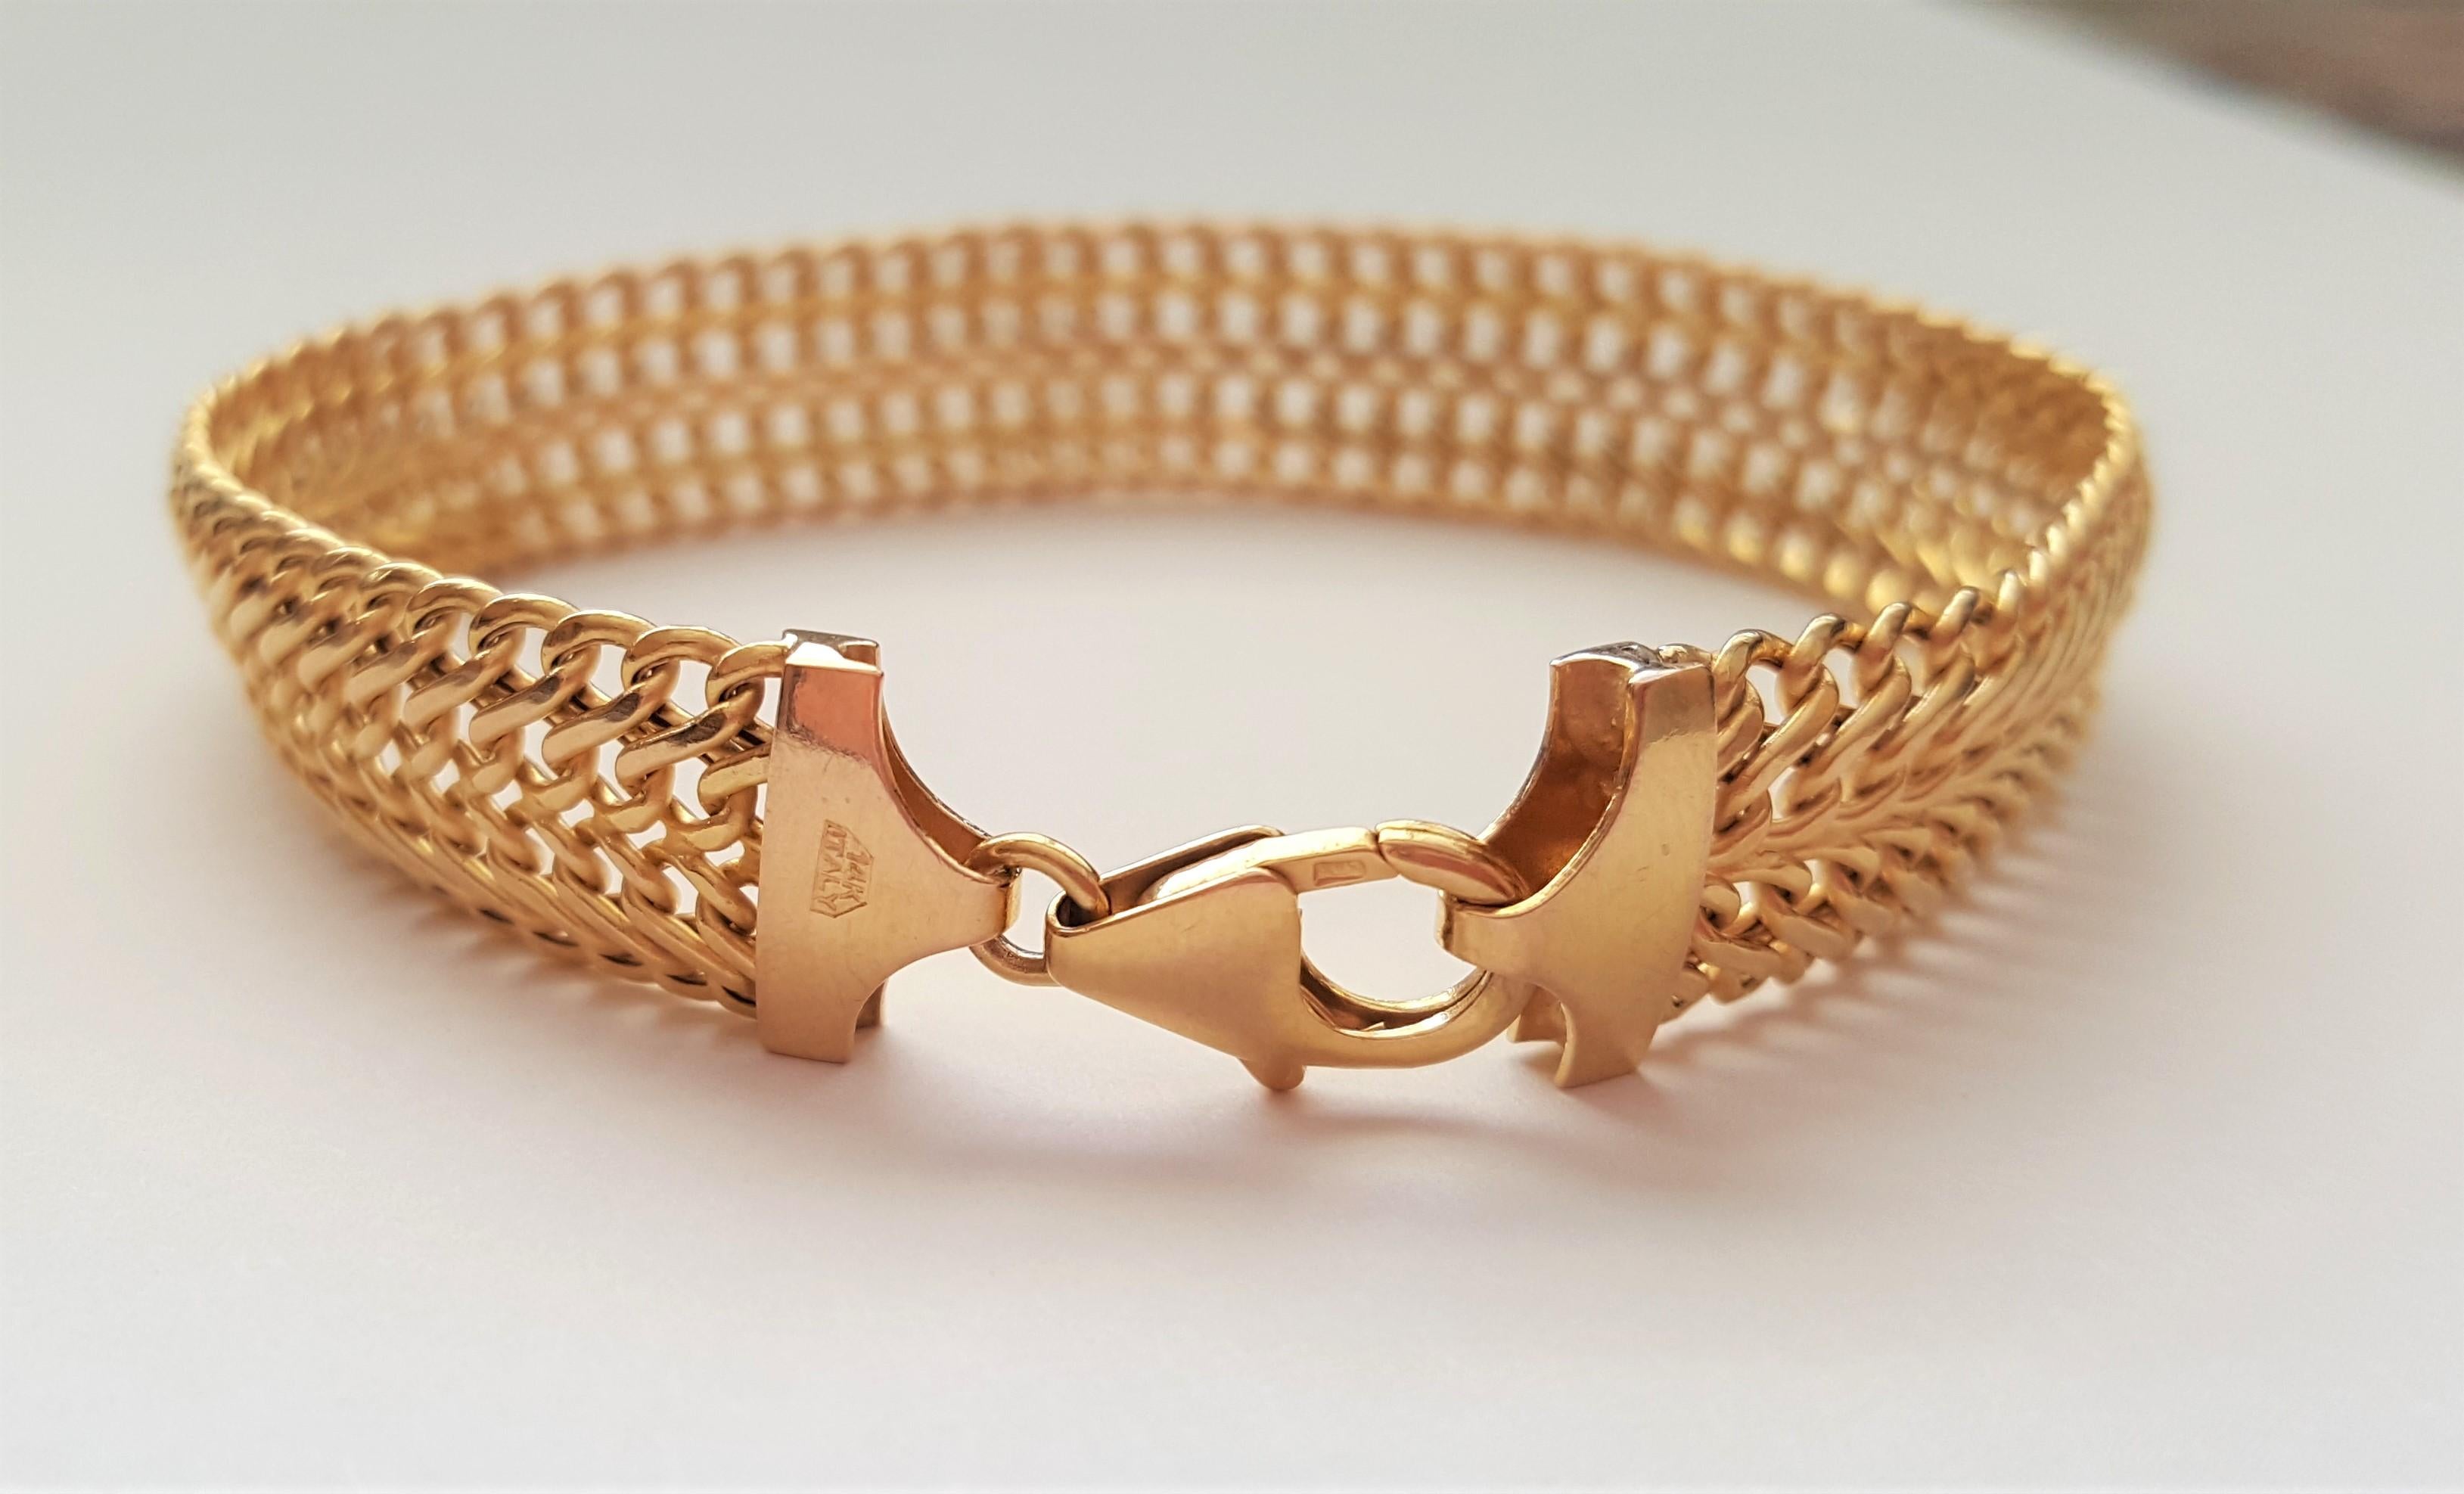 14kt gold mesh-style Italian Milor designer bracelet. The bracelet is 7 inches long, 10.6mm wide, 8.2 grams in weight. Secured with a lobster clasp and stamped 14kty Italy. Overall, this bracelet is in very good condition and appears hardly worn.